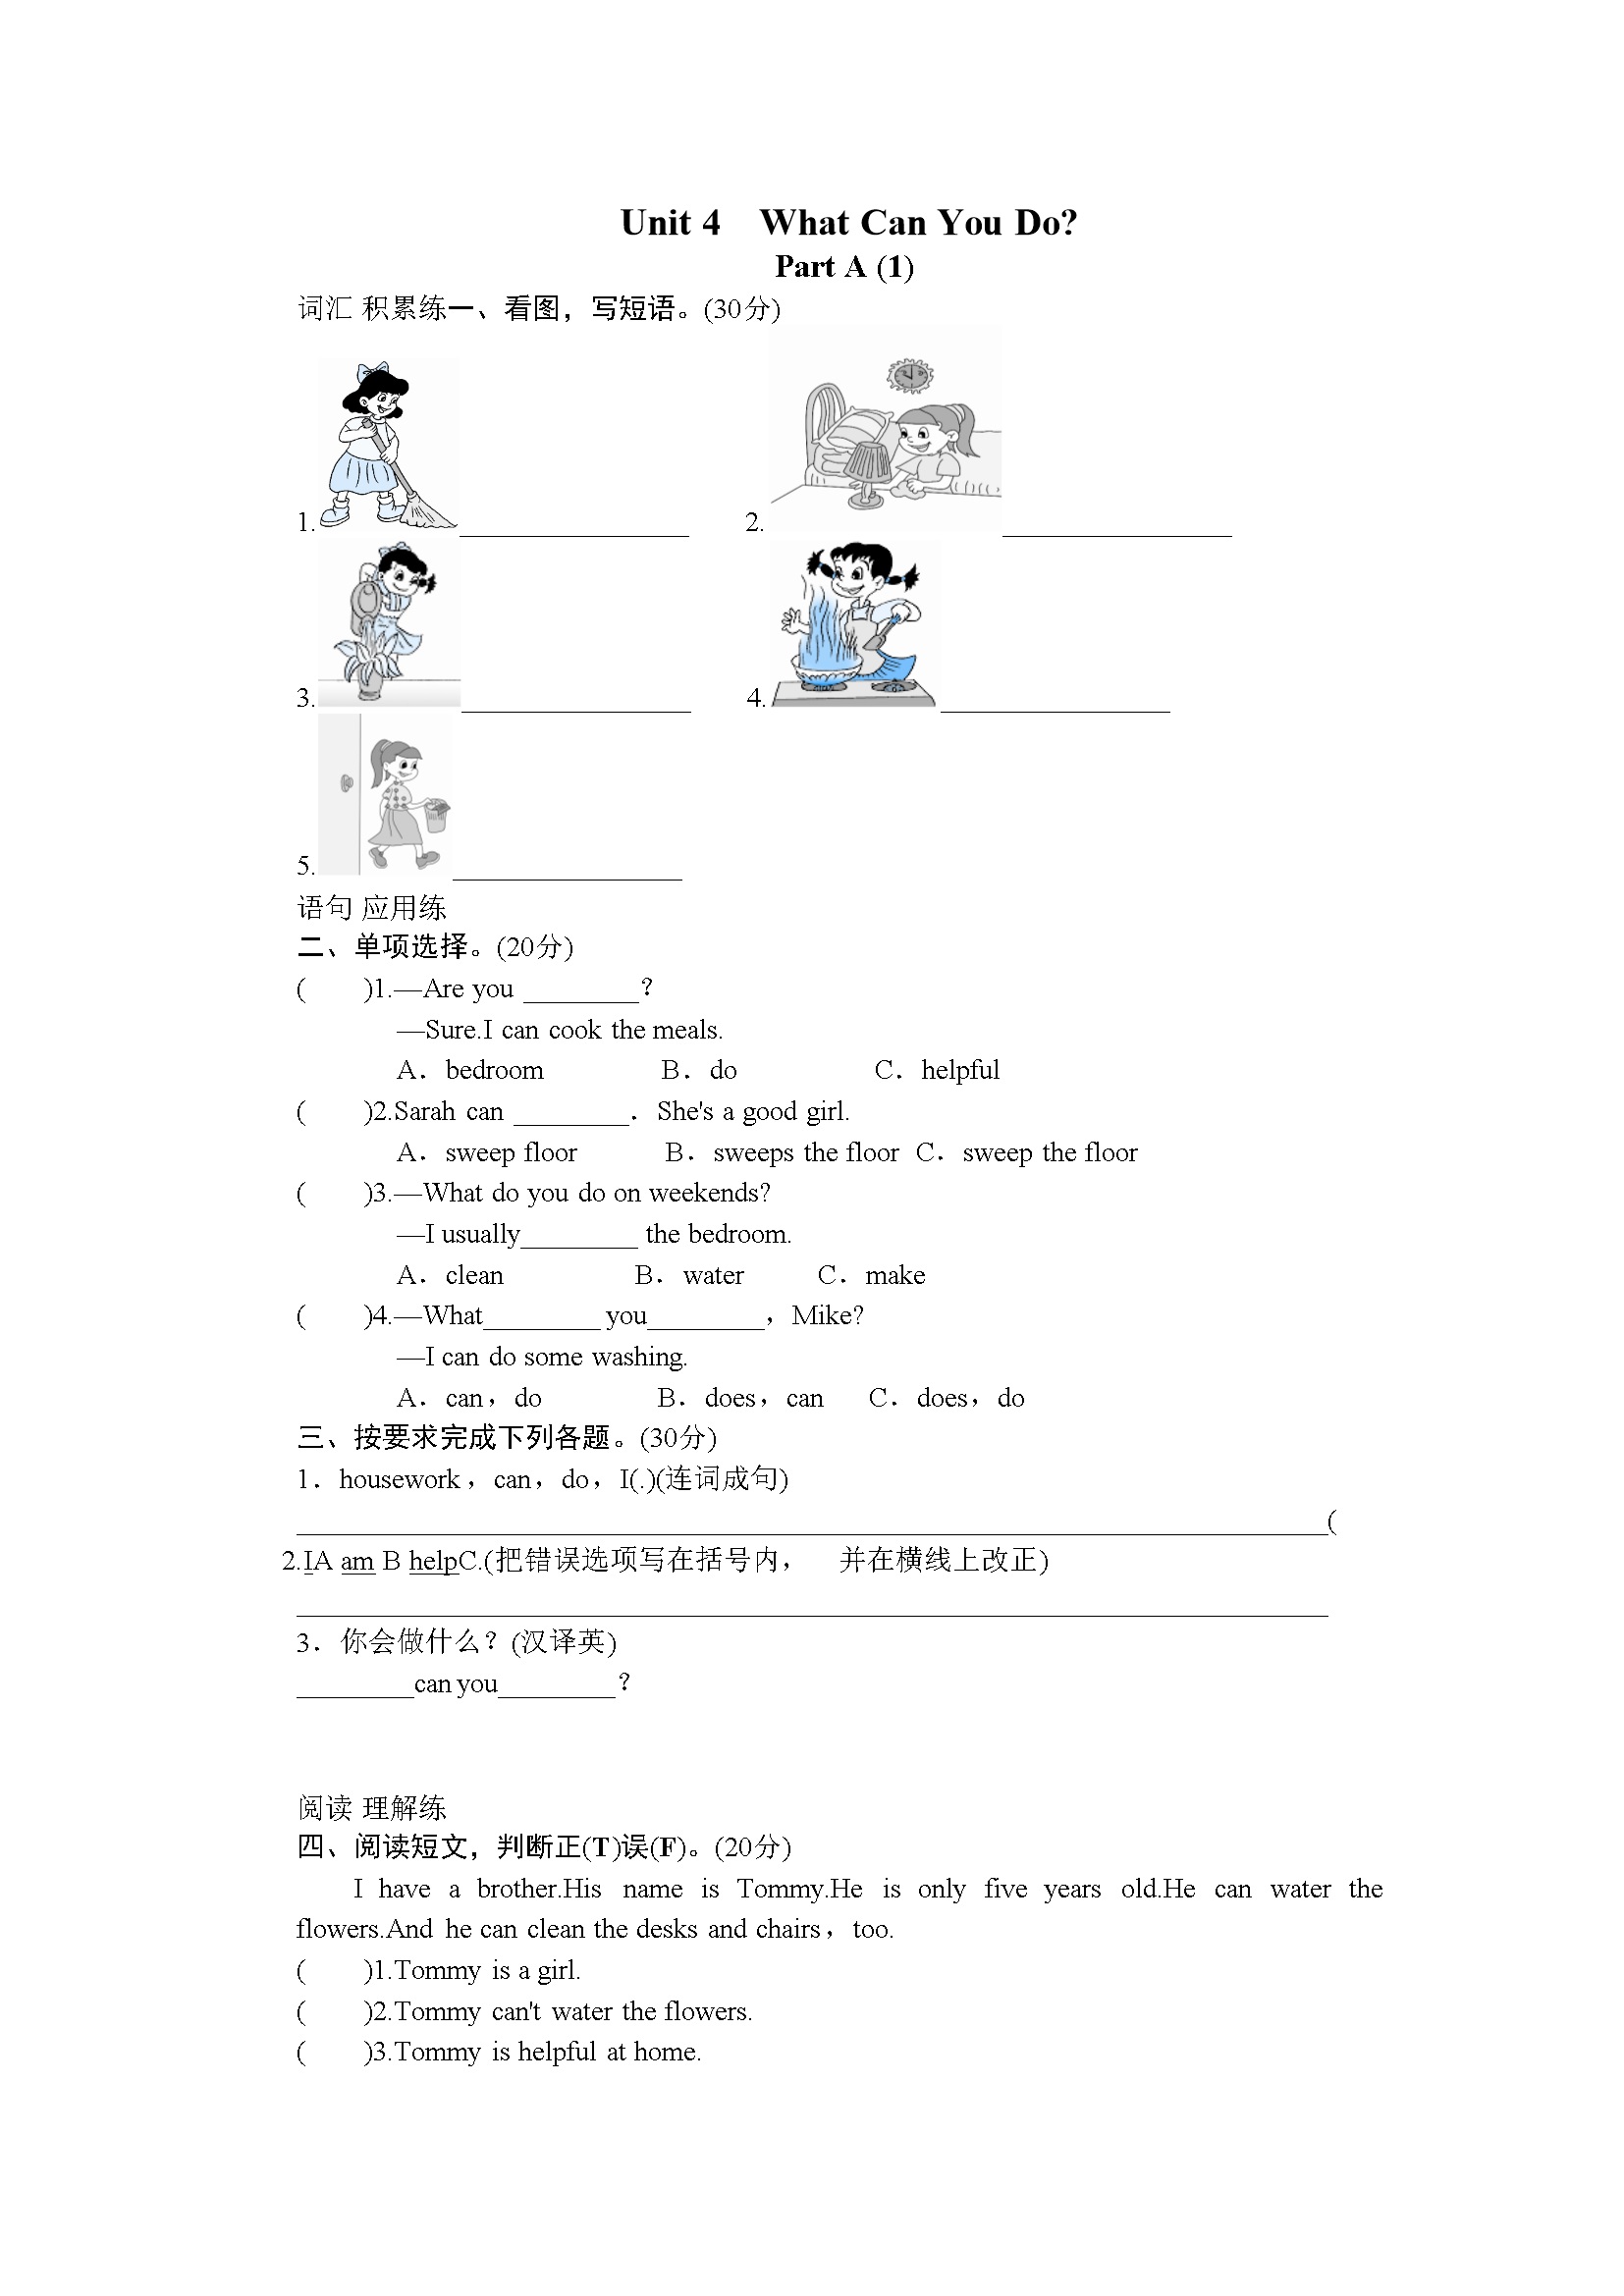 Unit 4 What can you do-PartA试题及答案 (1)